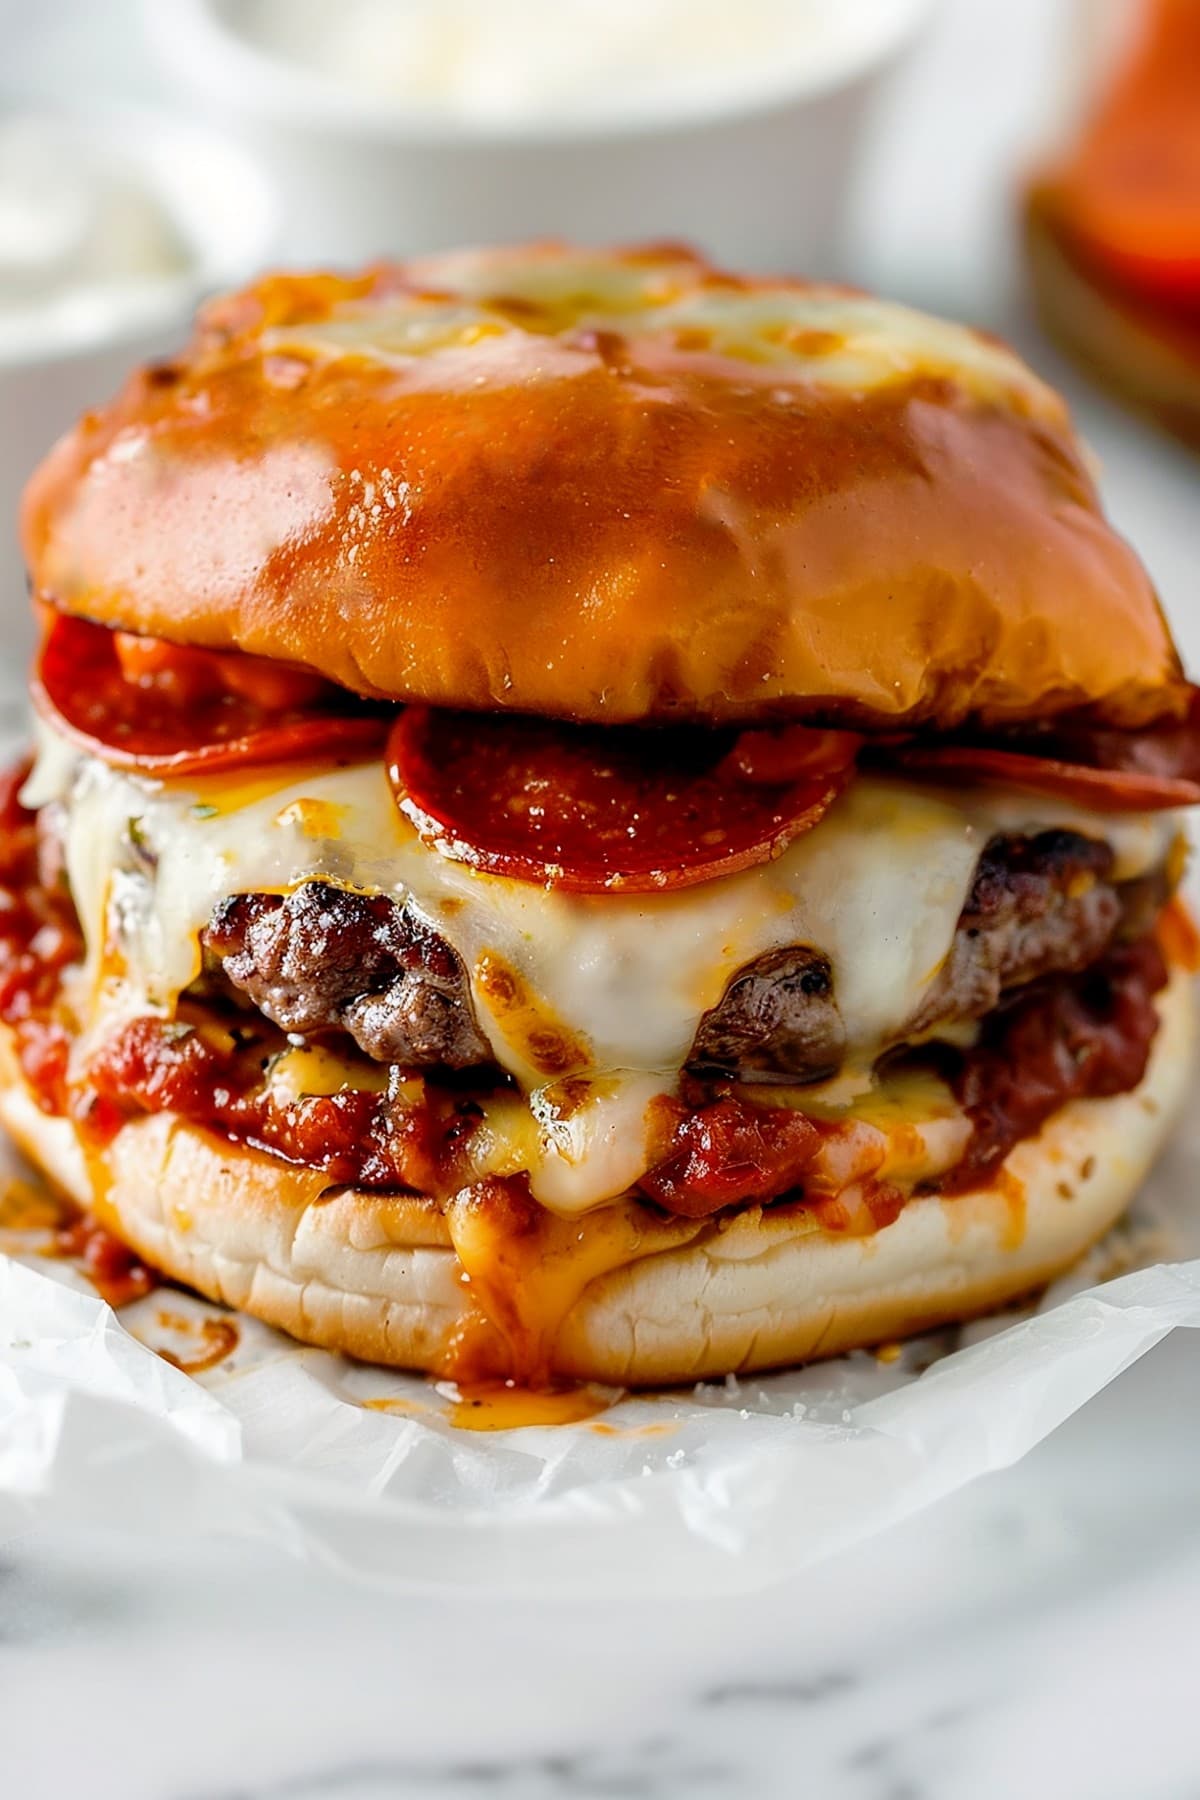 Juicy pizza burgers stacked with savory pepperoni, melted mozzarella cheese, and tangy marinara sauce